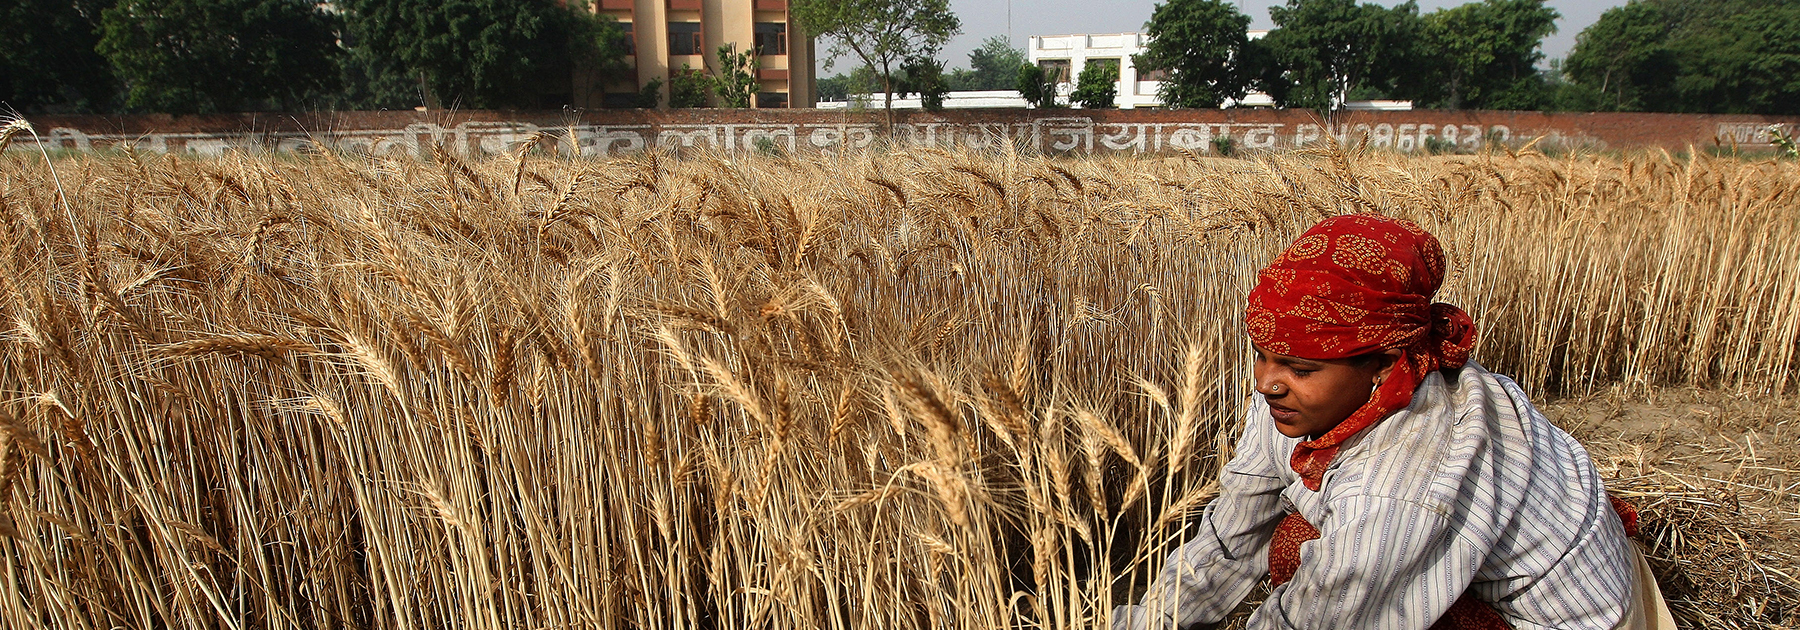 A farmer harvests a crop of wheat in a field in Ghaziabad. (PRAKASH SINGH/AFP/Getty Images)